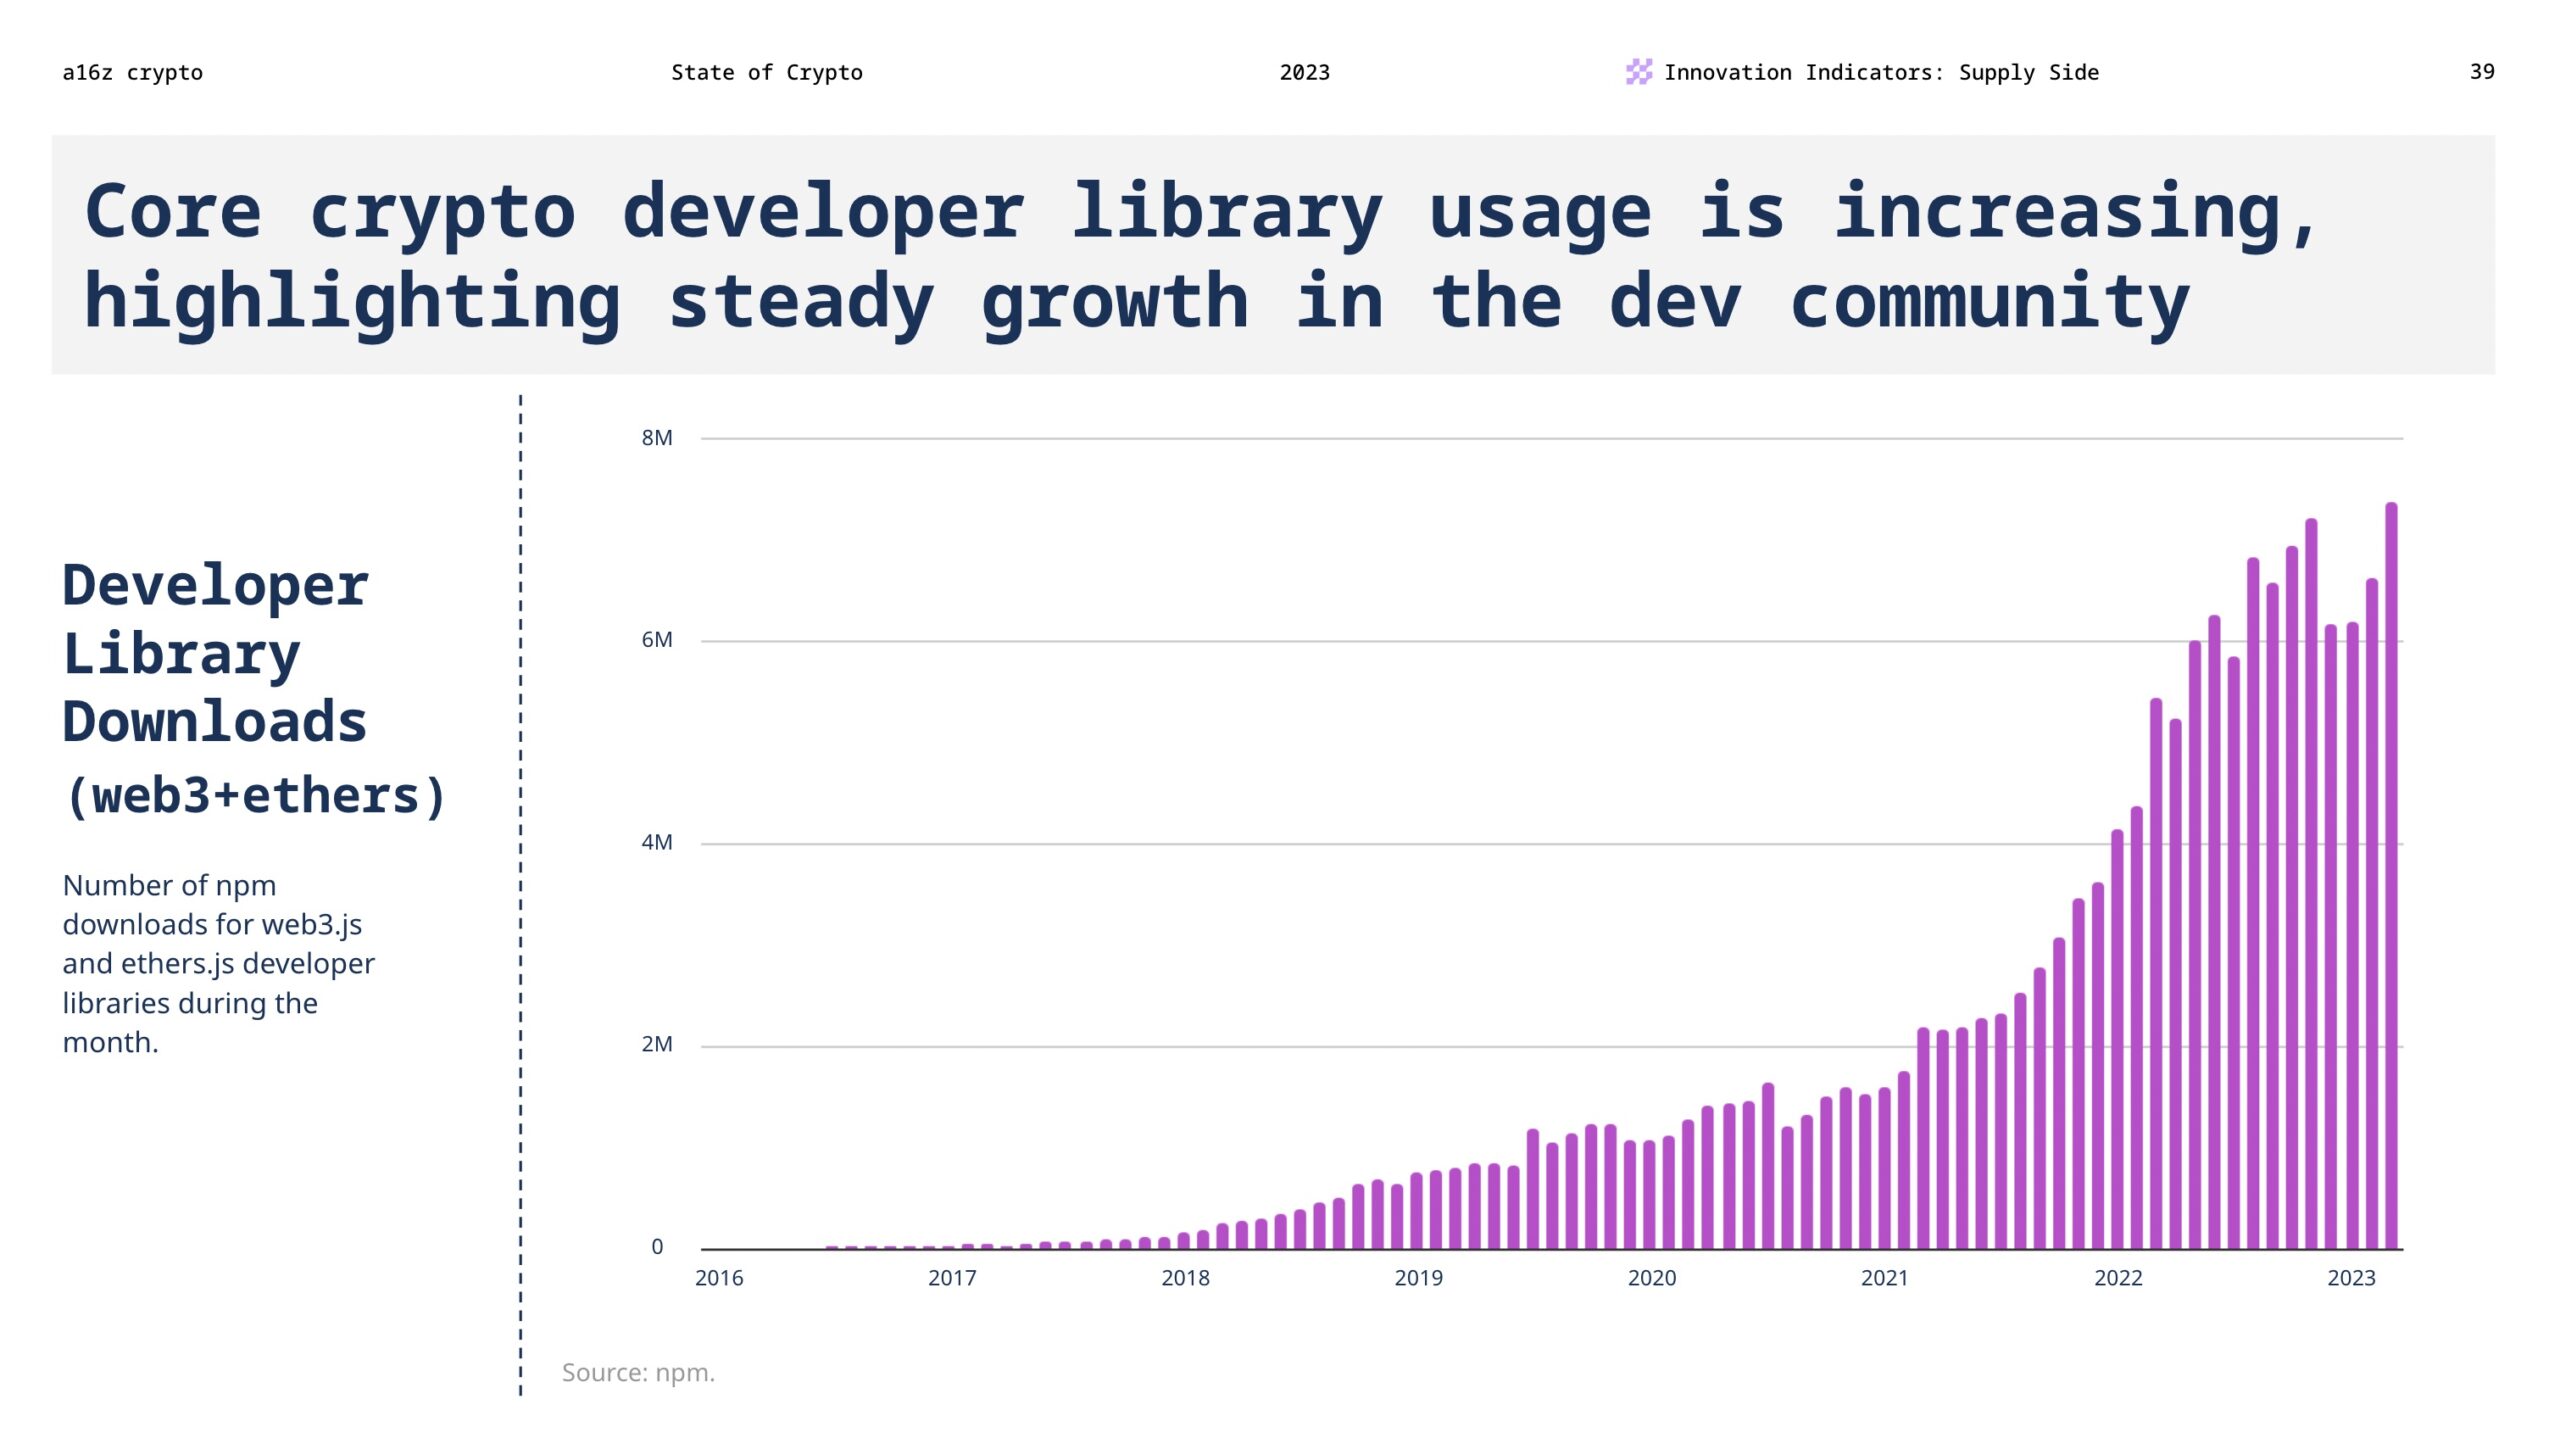 Core crypto developer library usage is increasing, highlighting steady growth in the community